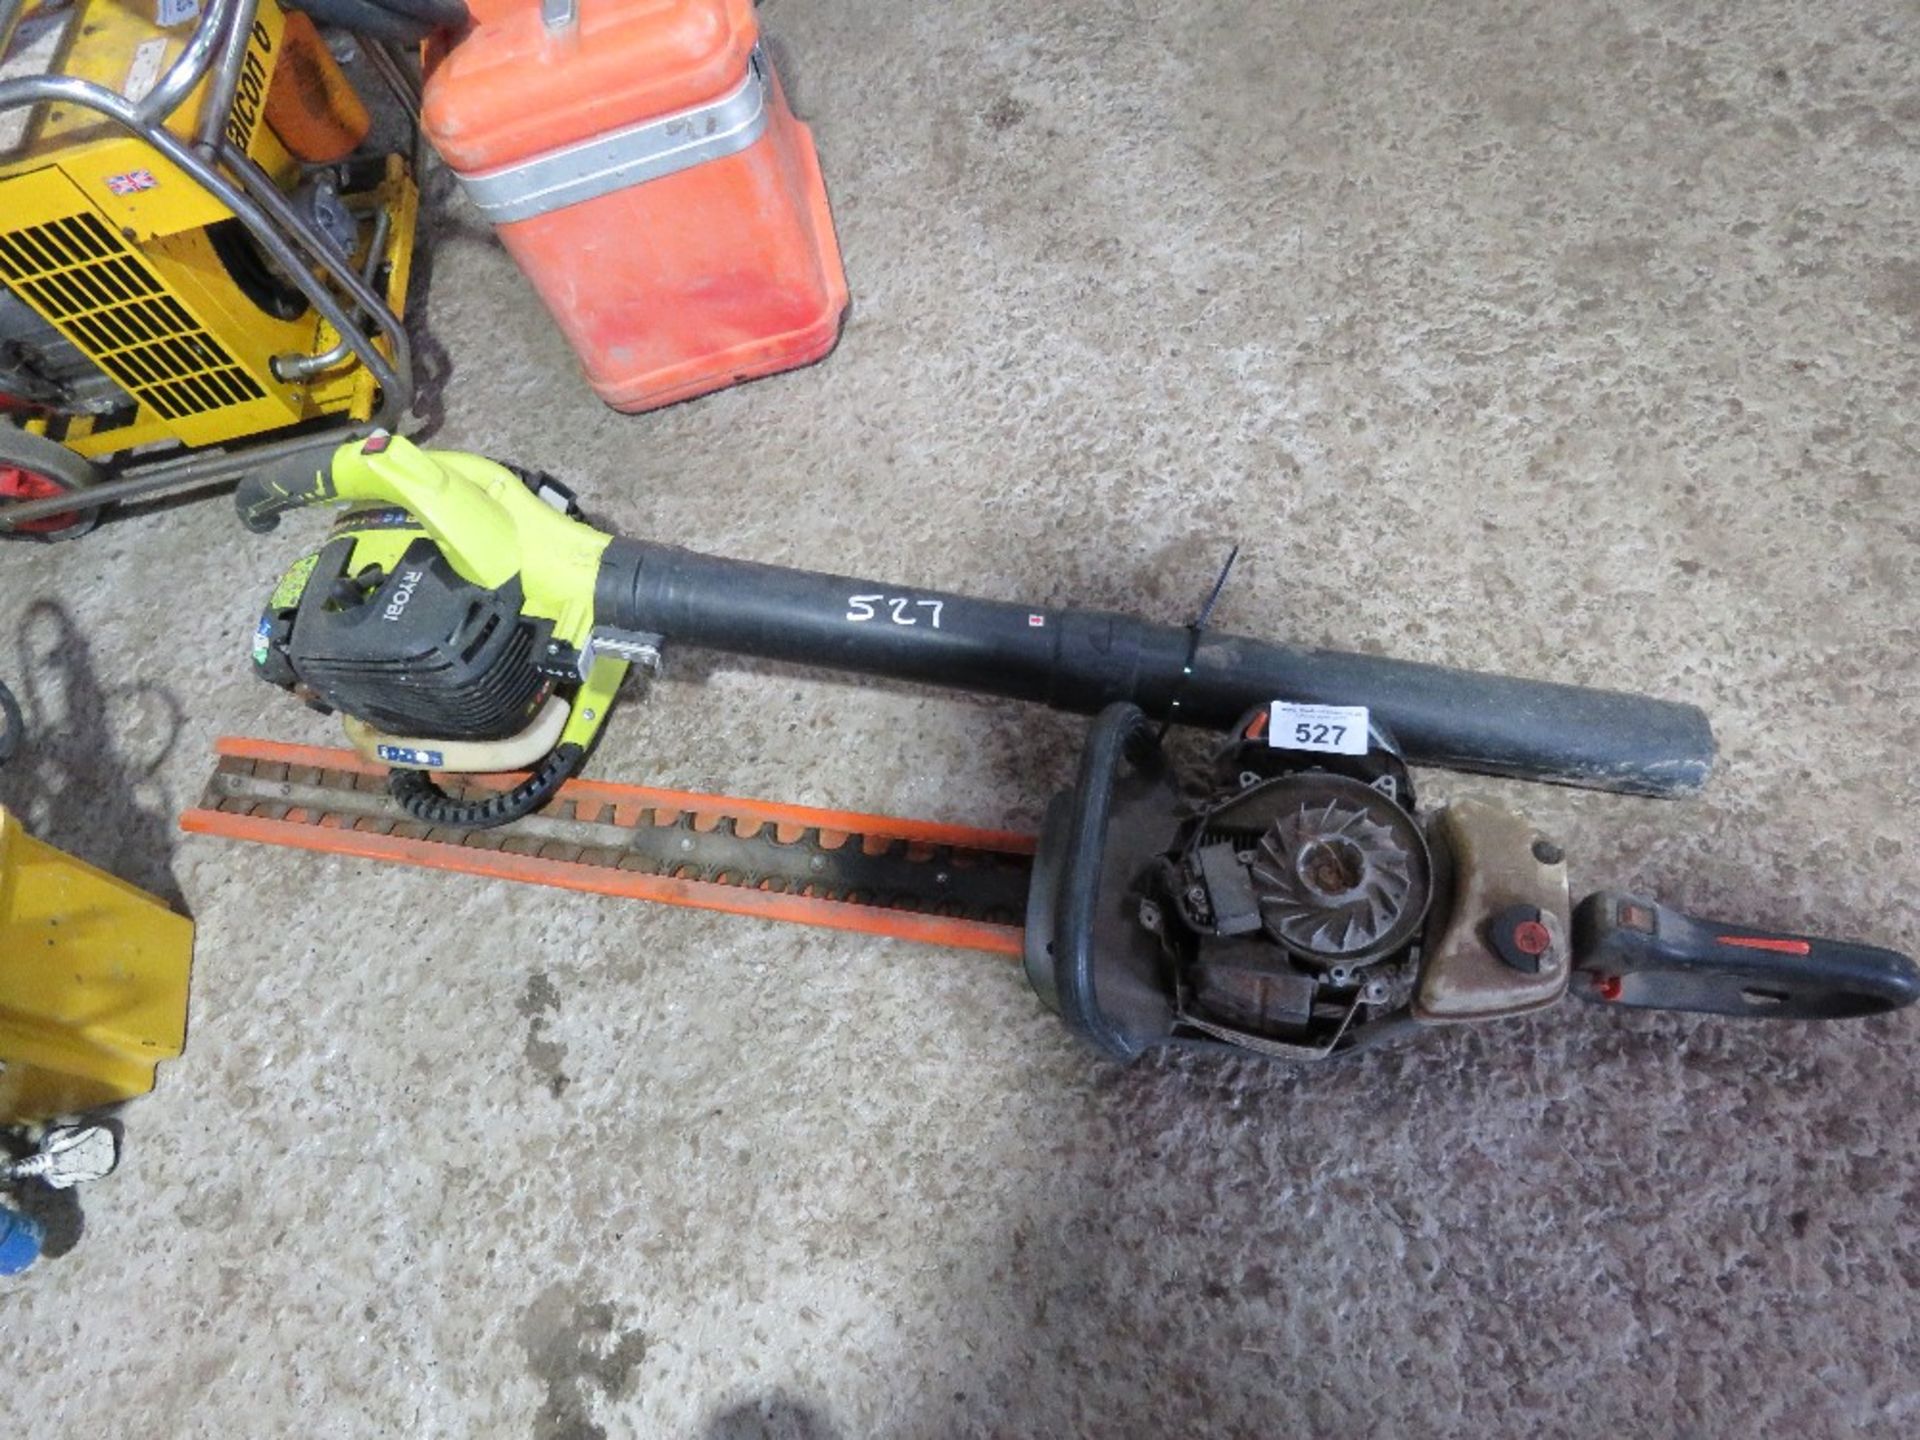 HEDGE CUTTER AND HAND HELD BLOWER.